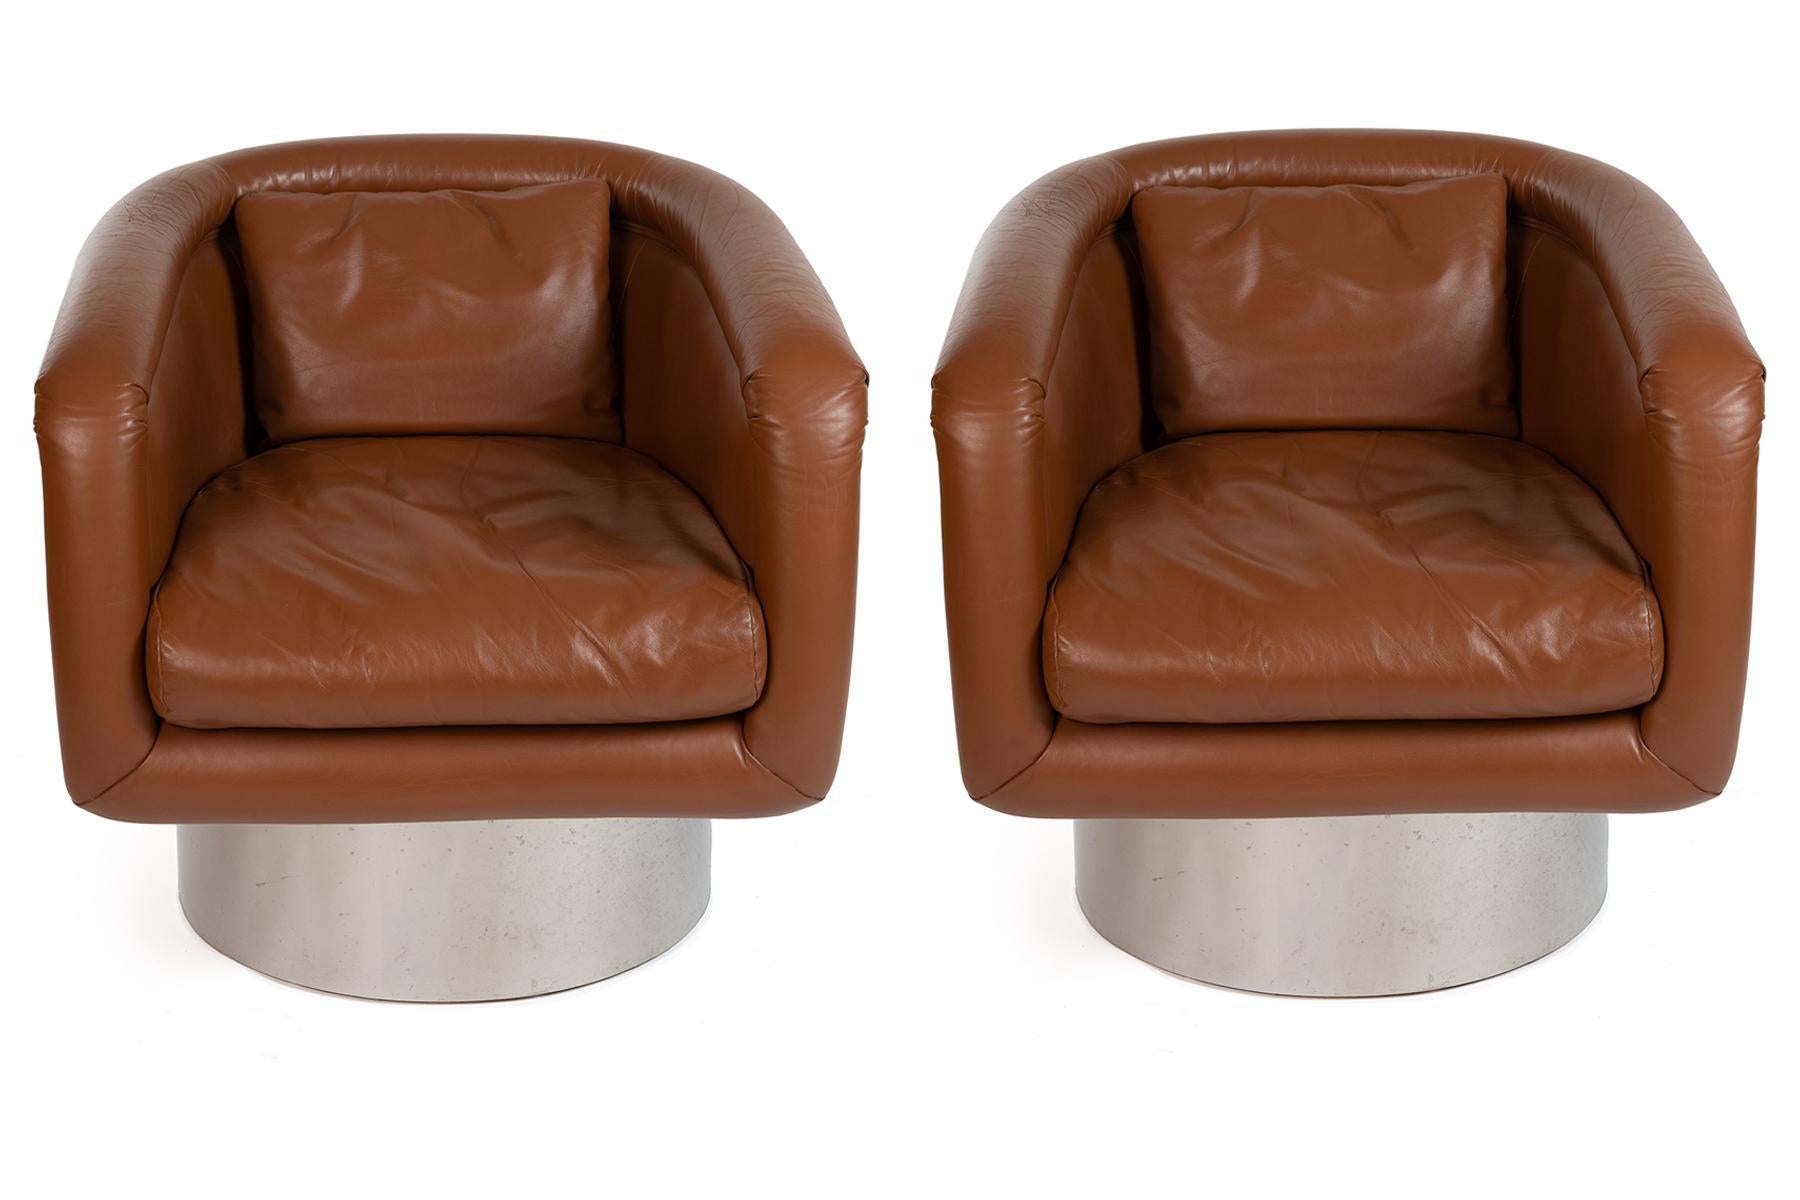 All original Leon Rosen for Pace swivel leather lounge chairs, circa early 1970s. These examples retain their original milk chocolate leather upholstery and steel bases. Price listed is for the pair.